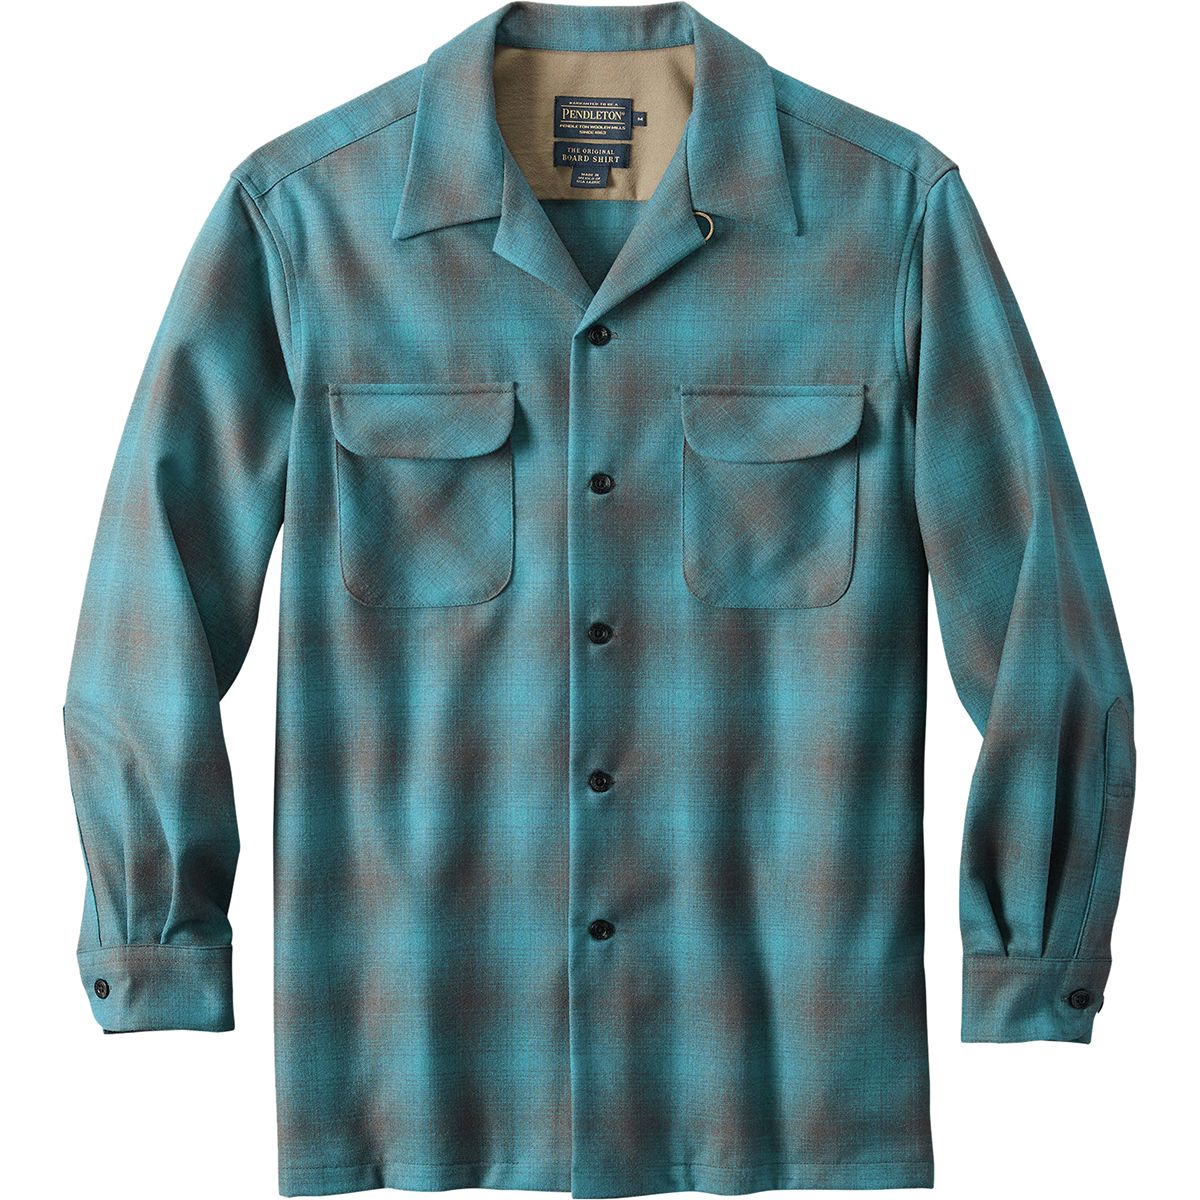 Pendleton Fitted Board Shirt - Men's | Backcountry.com